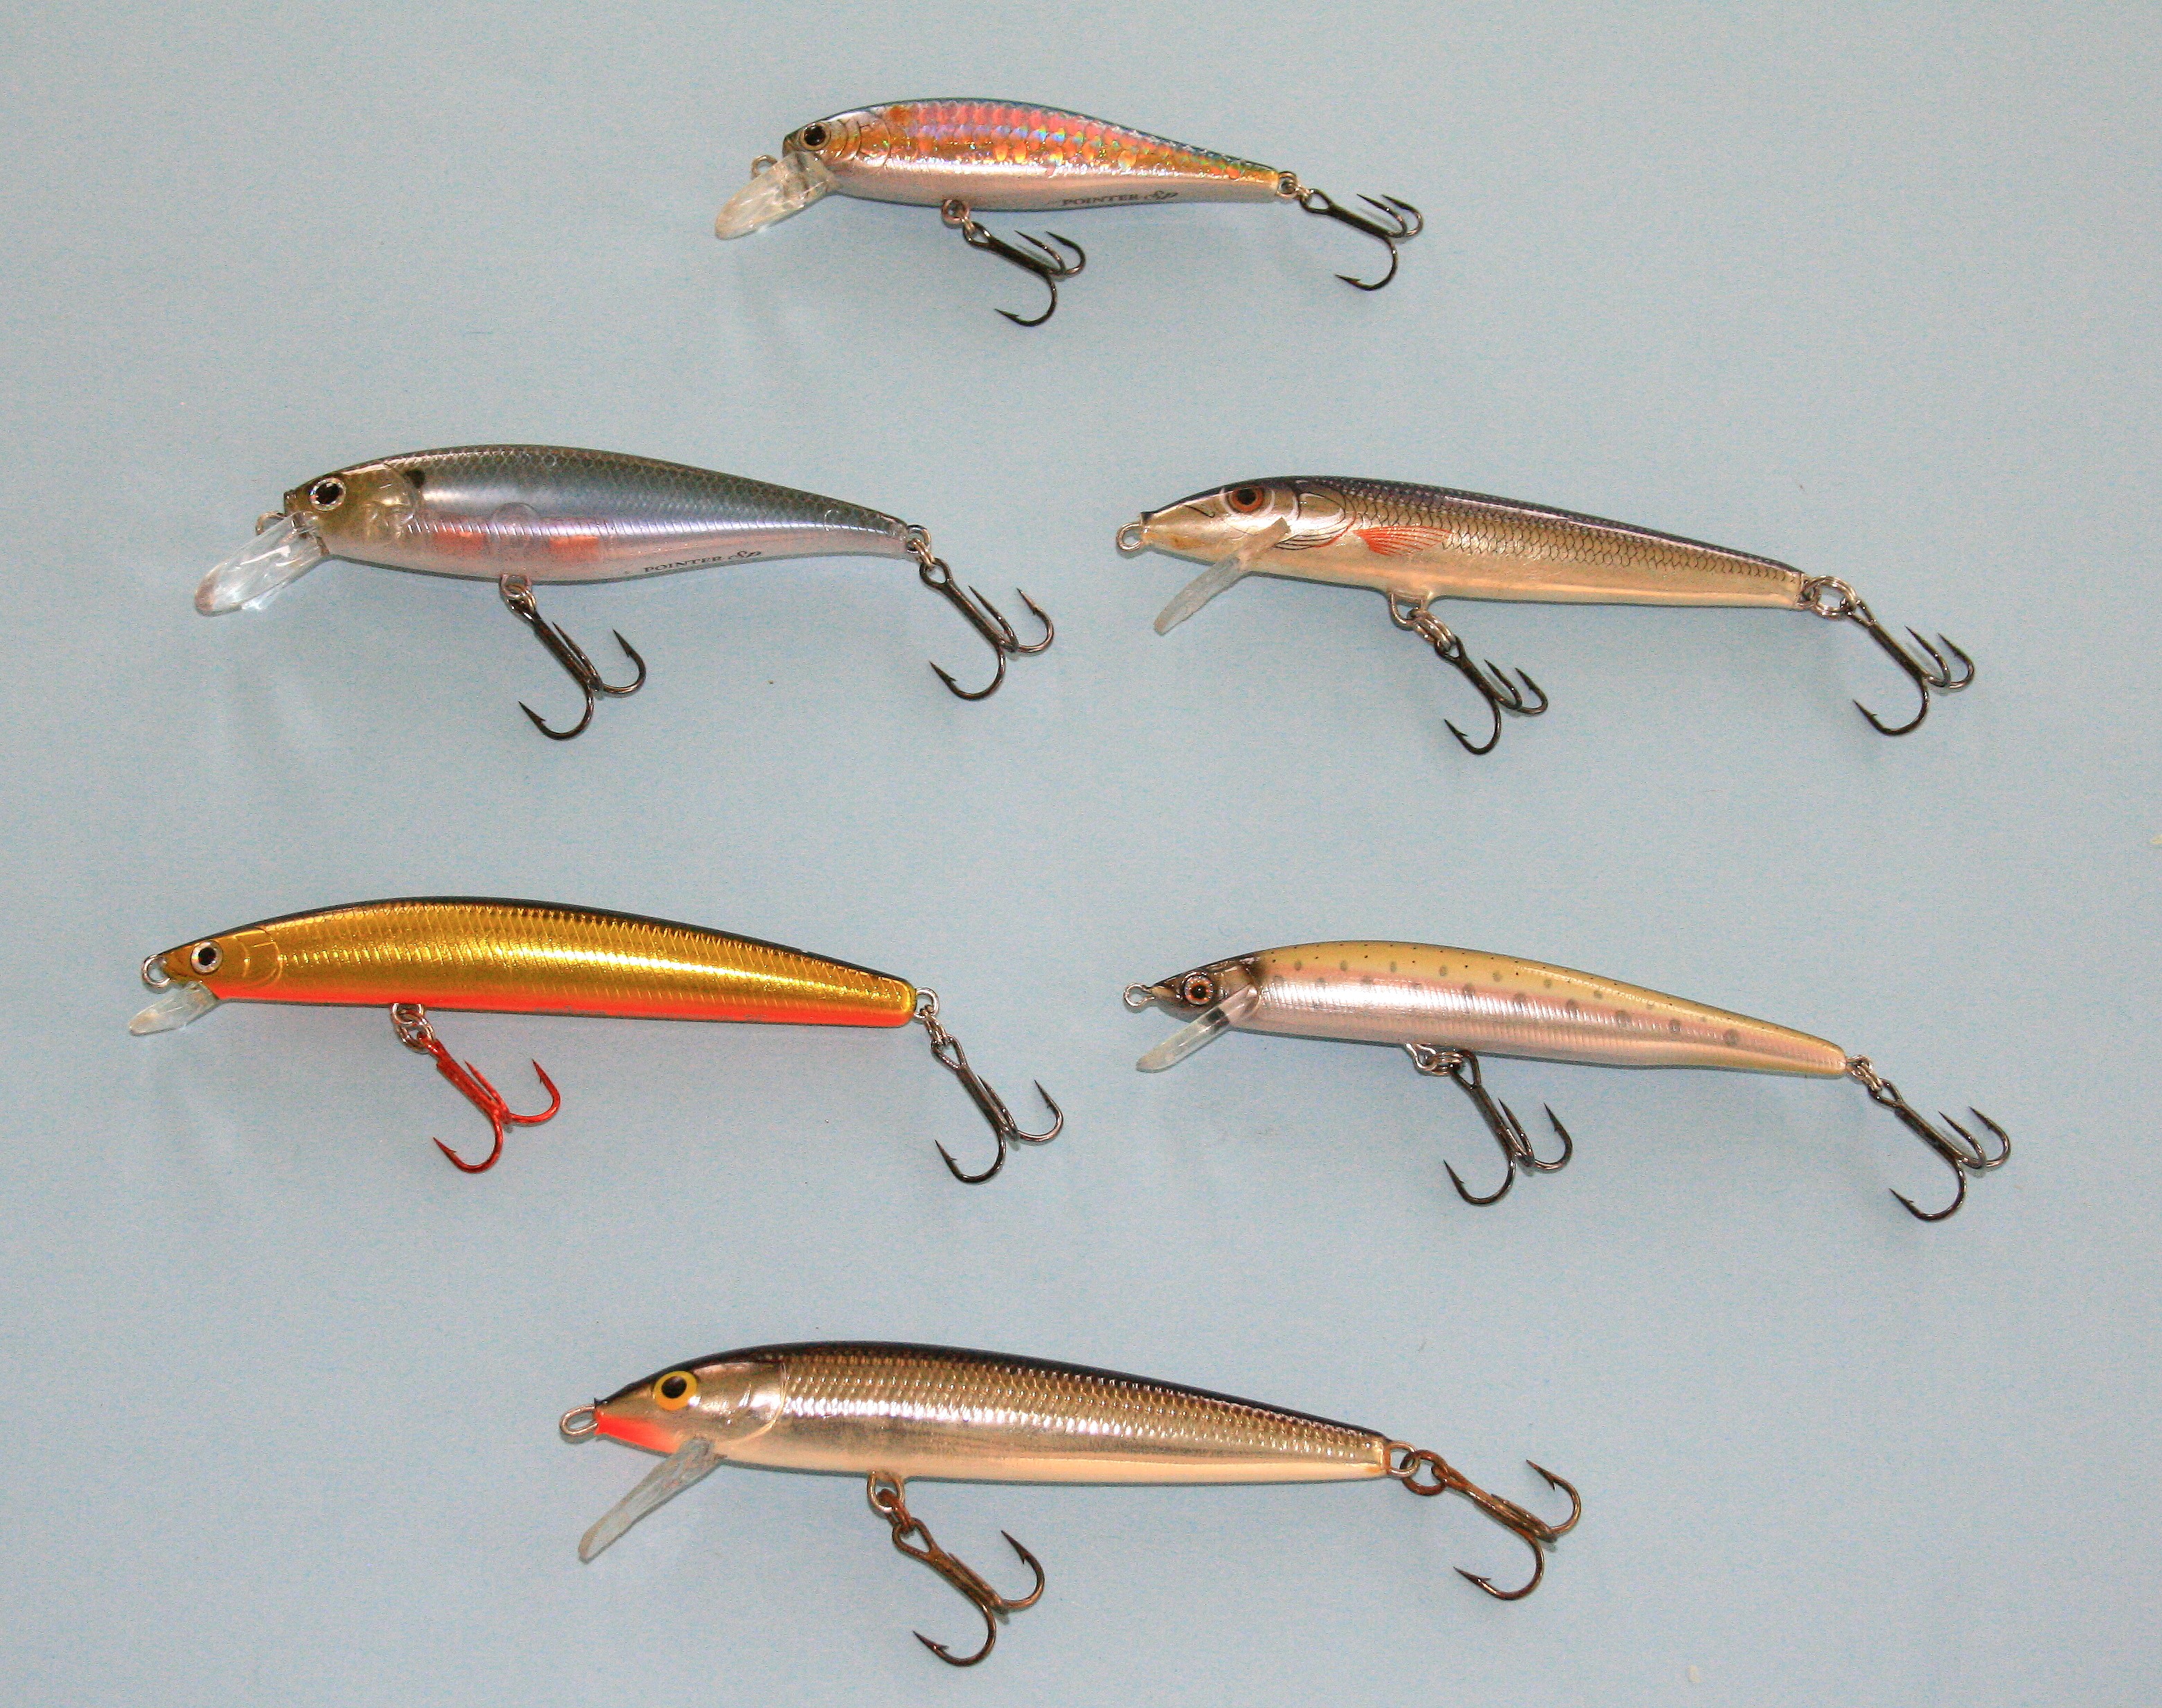 Good lake trout lures